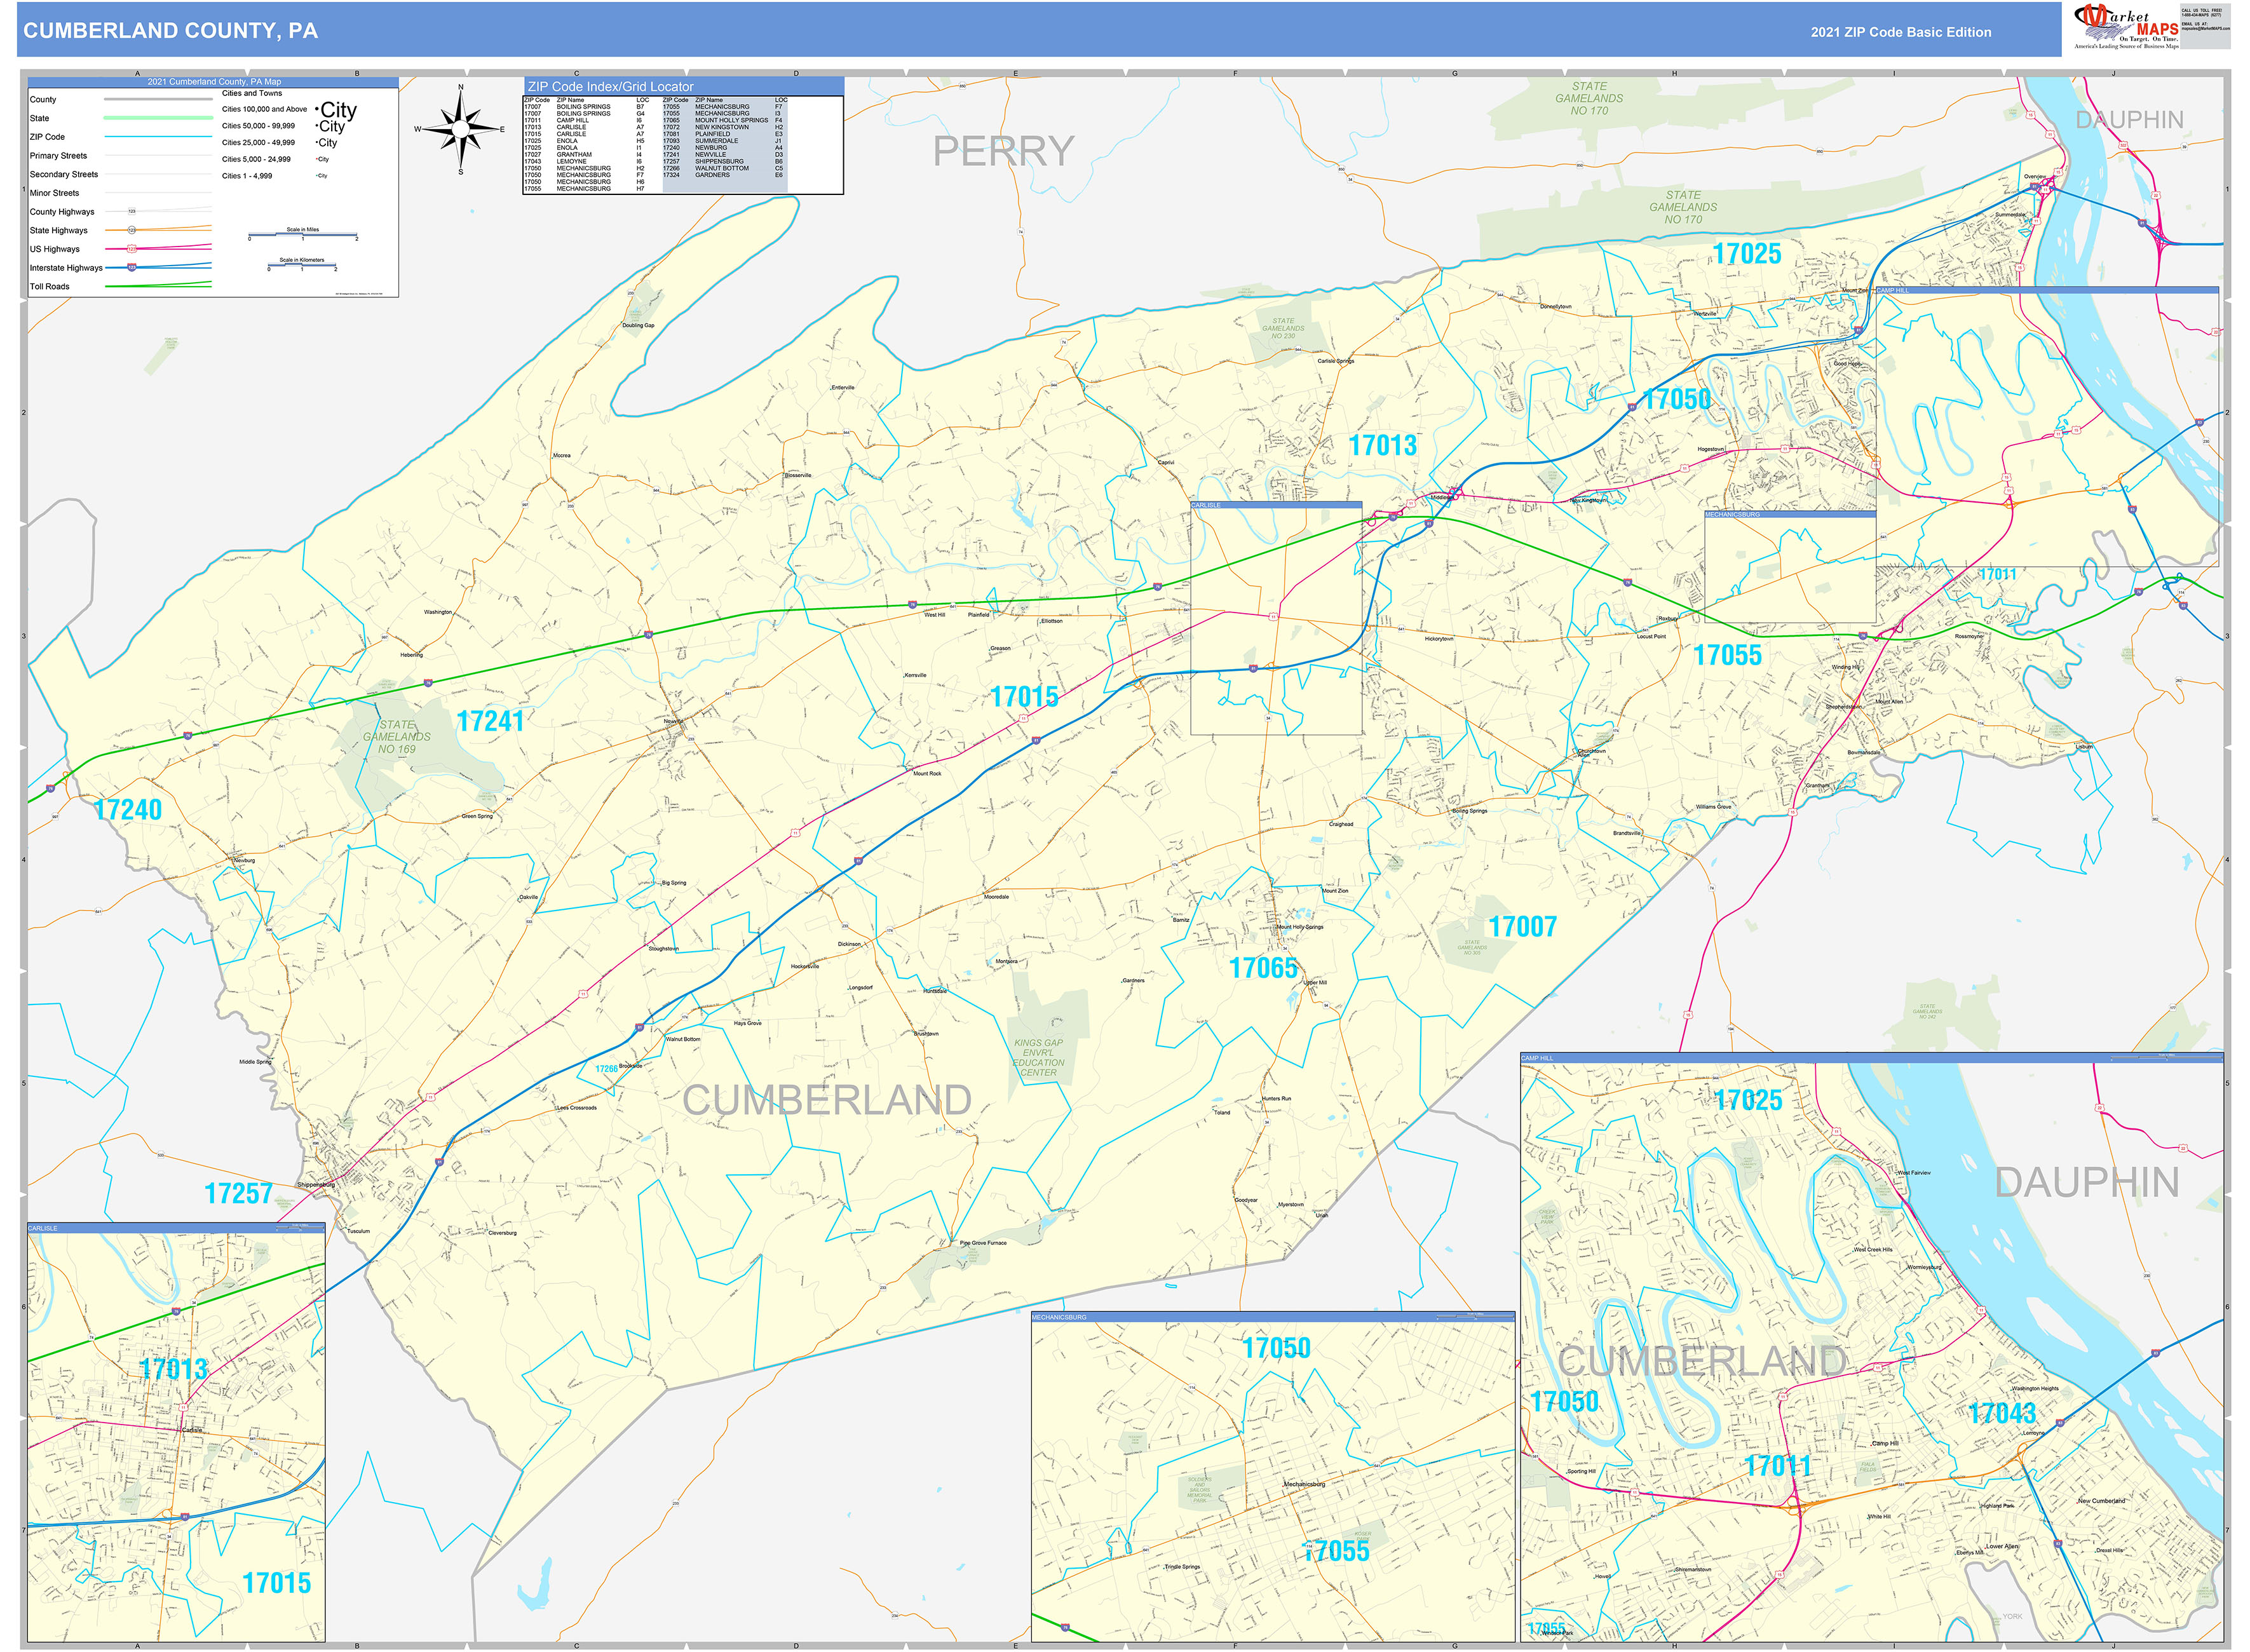 28 Map Of Cumberland County Maps Online For You - vrogue.co